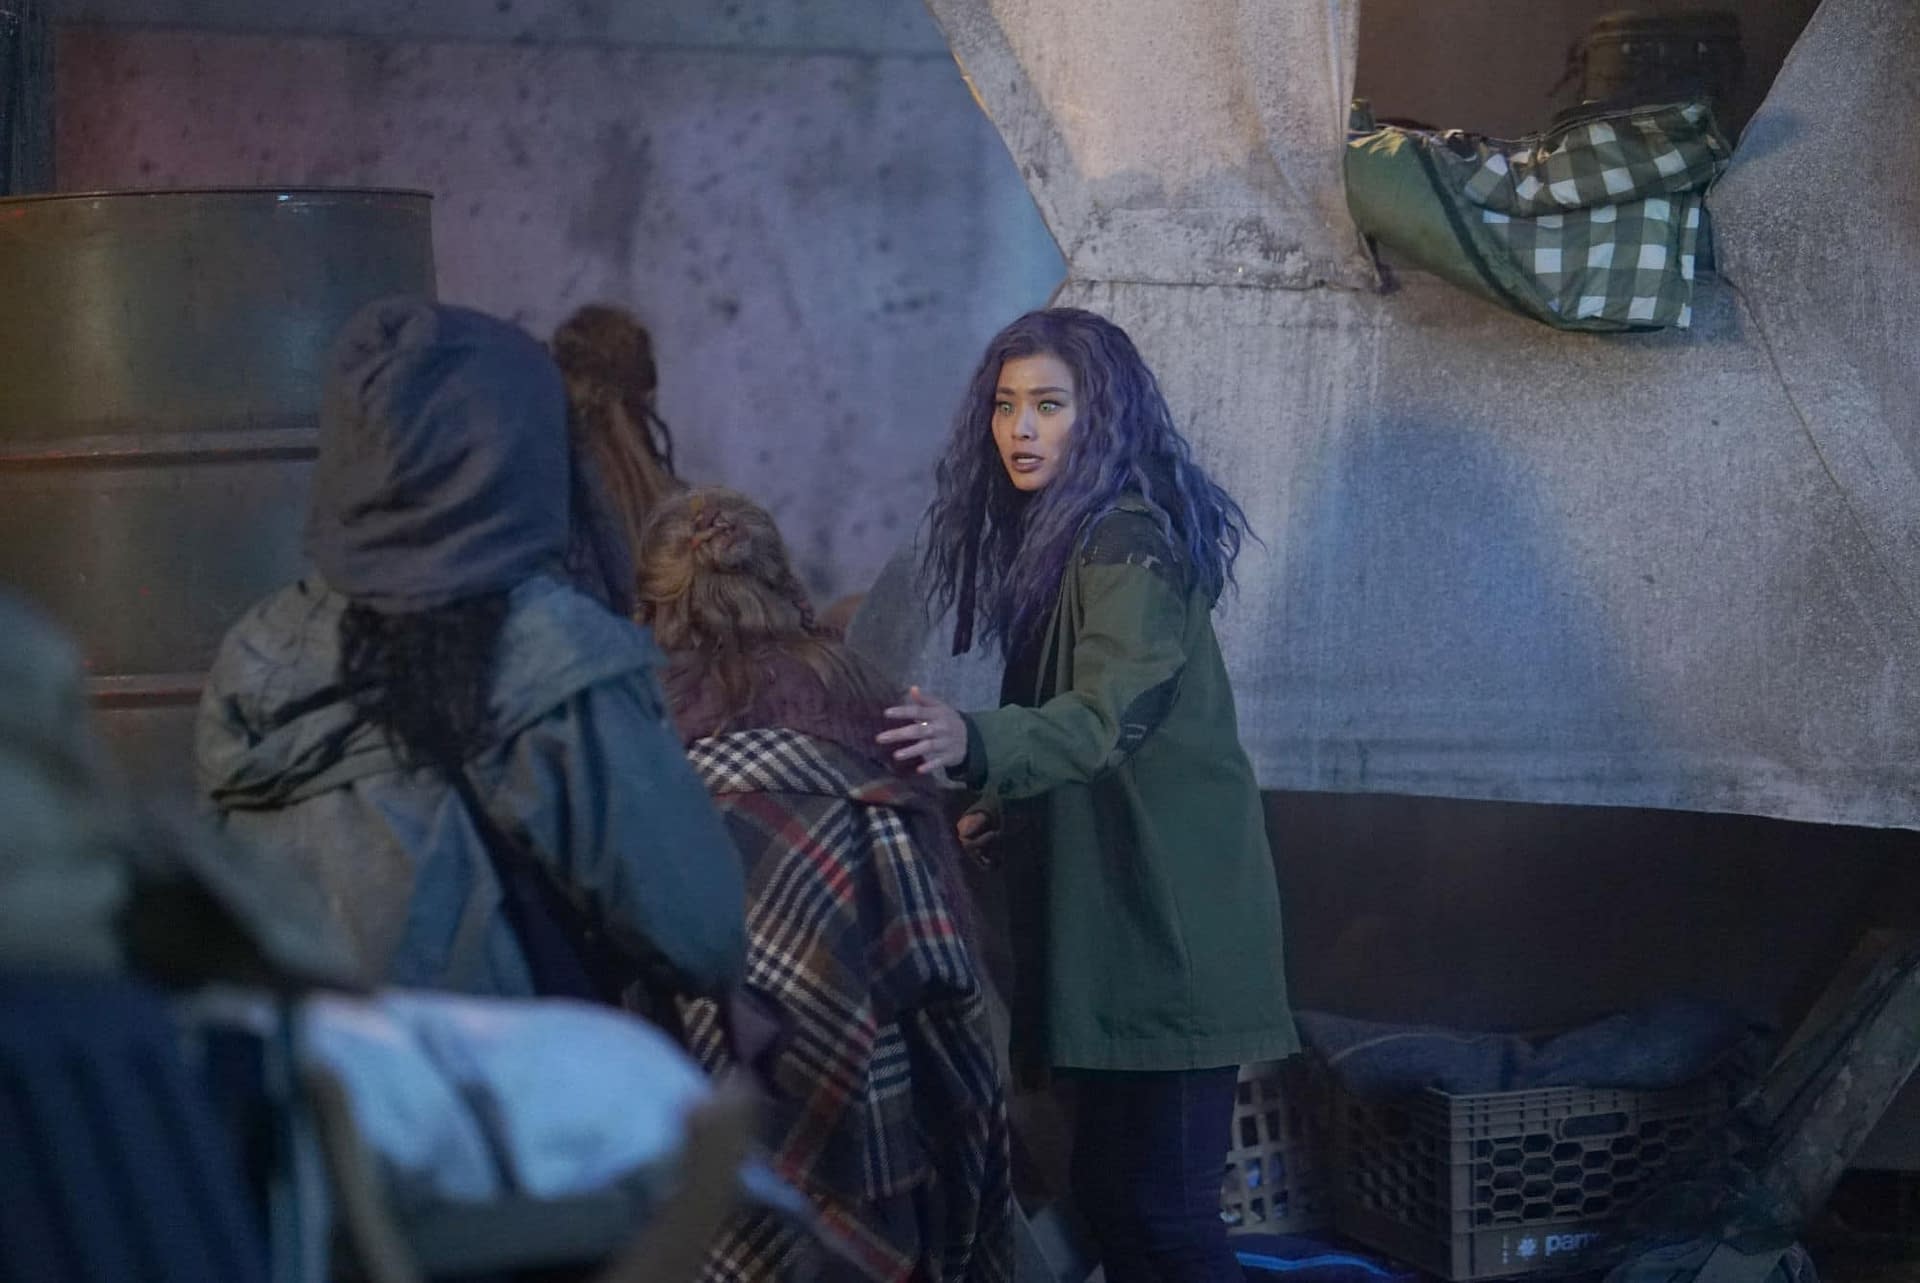 The Gifted Season 2 Episode 14: [MINOR SPOILERS] 16 Pictures from the New Episode